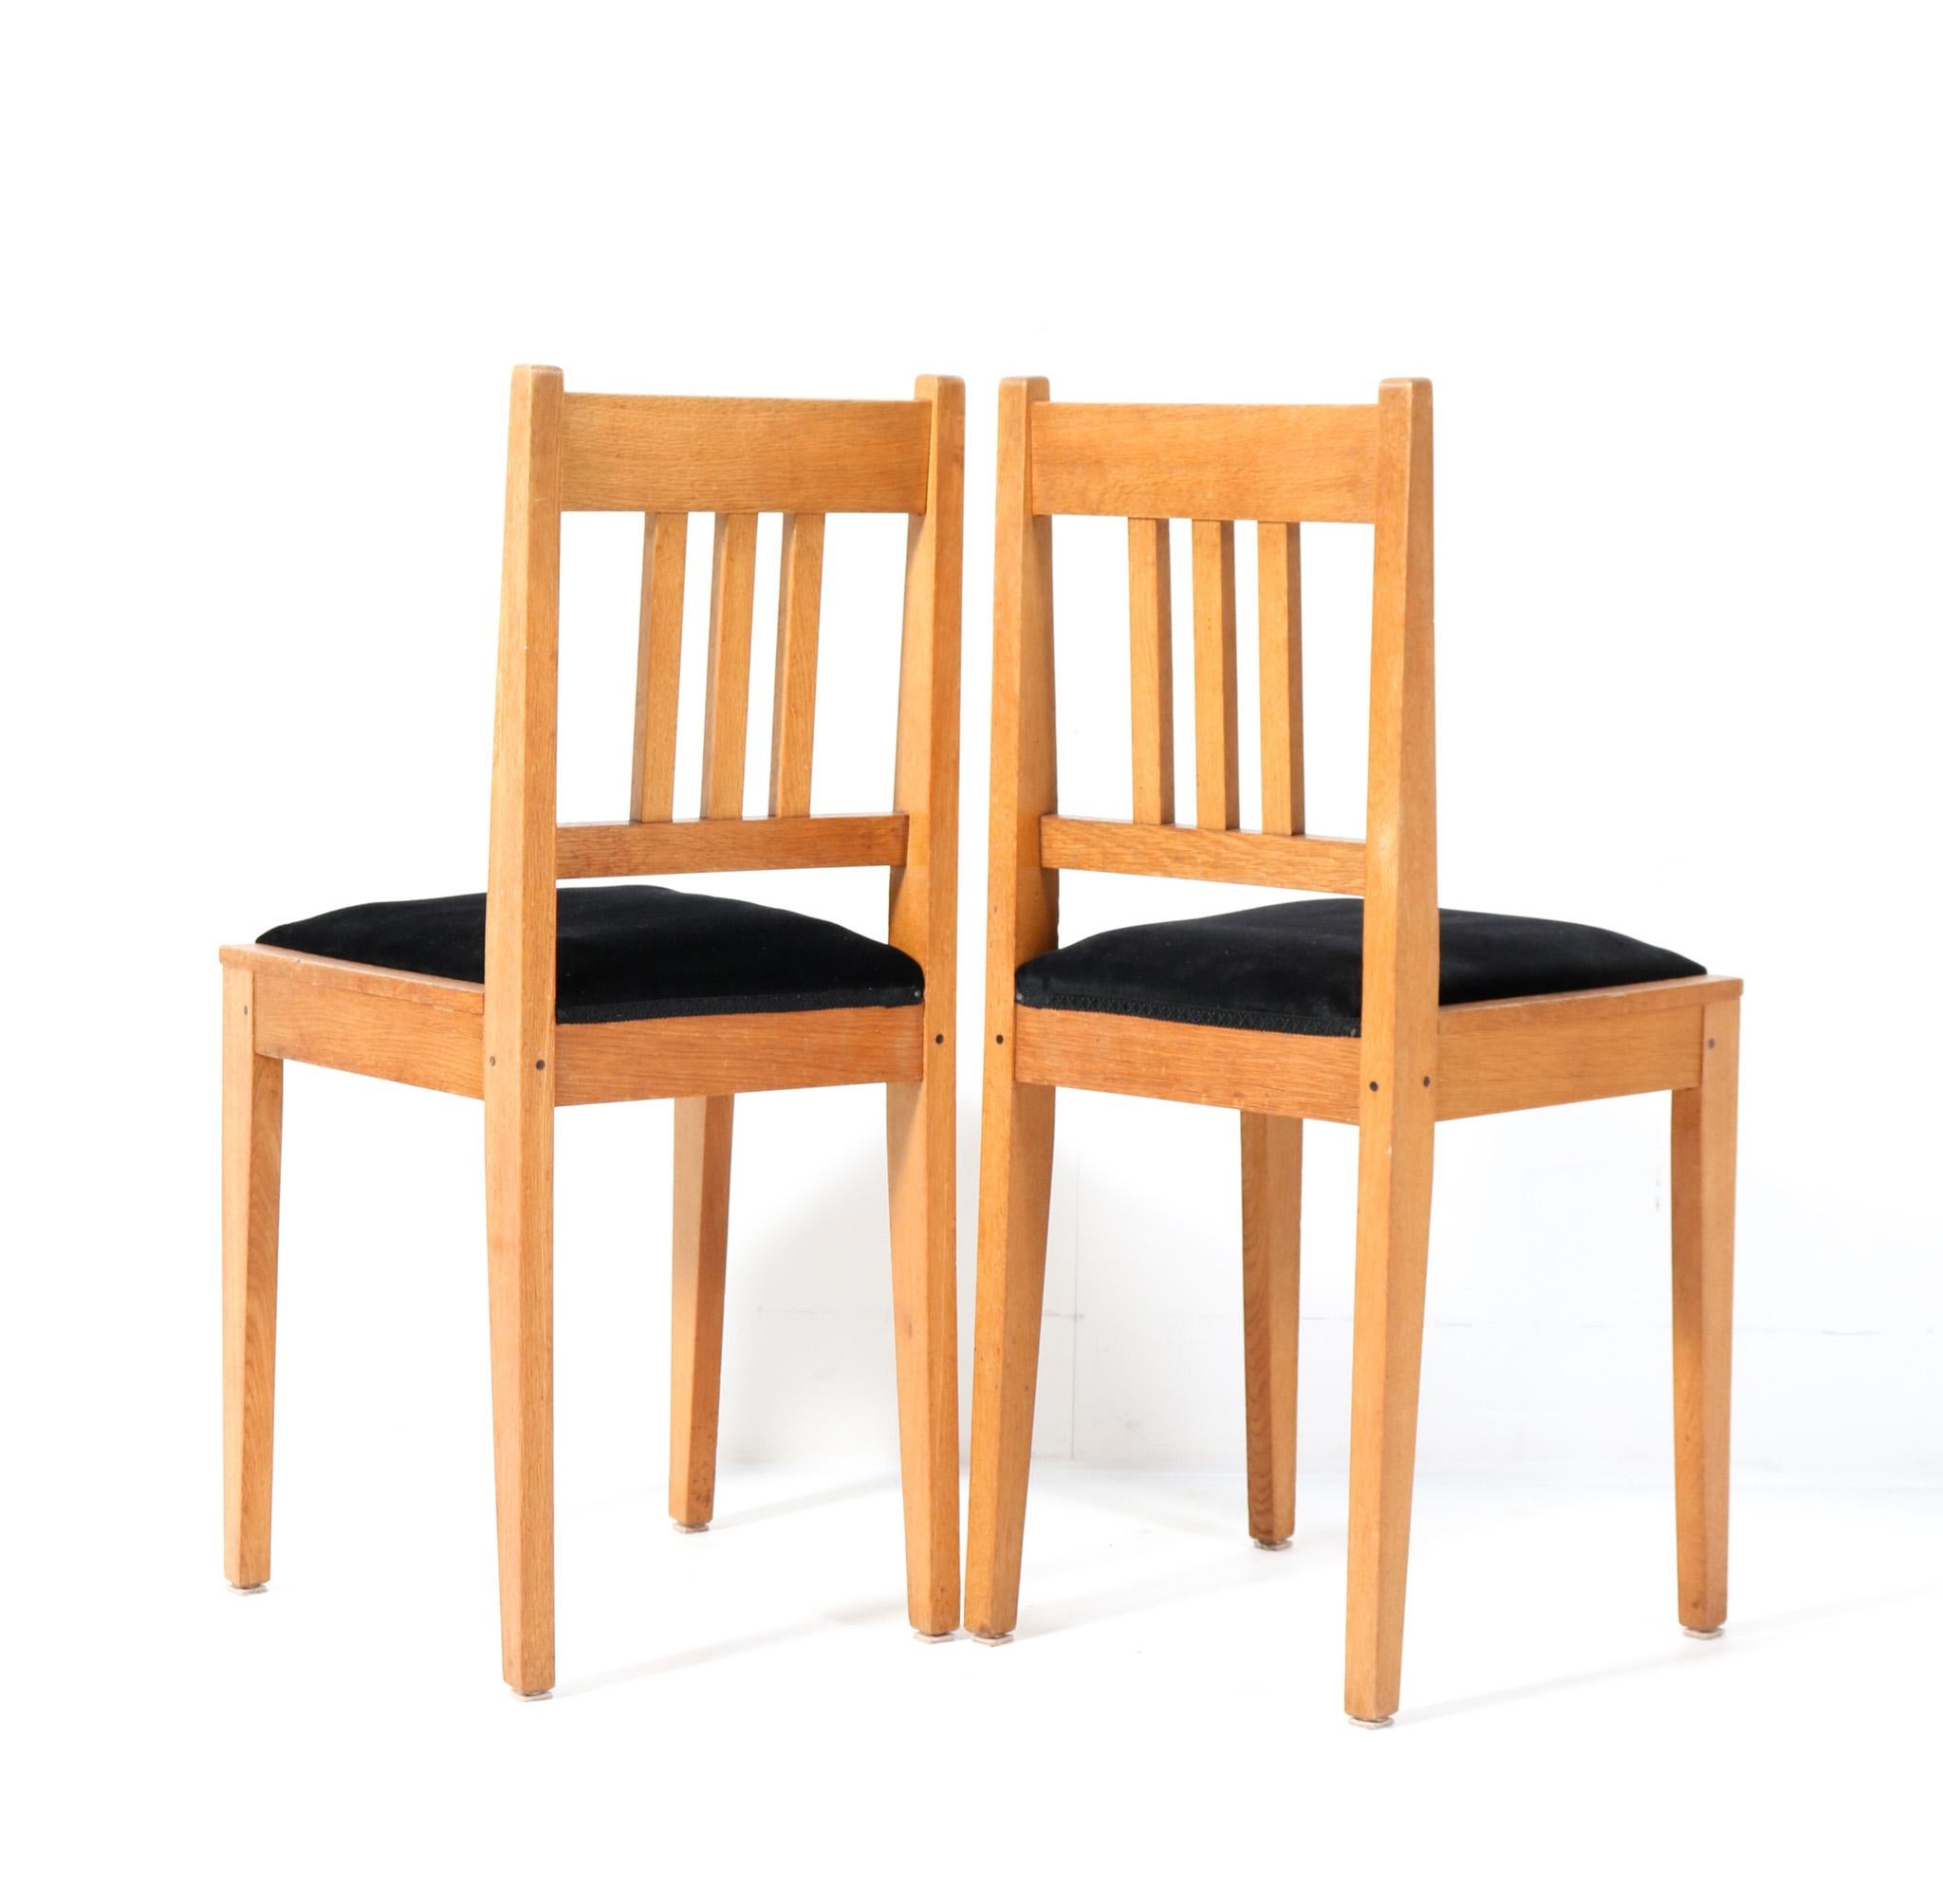 Pair of Oak Arts & Crafts Art Nouveau Side Chairs by Jac. van den Bosch, 1904 In Good Condition For Sale In Amsterdam, NL